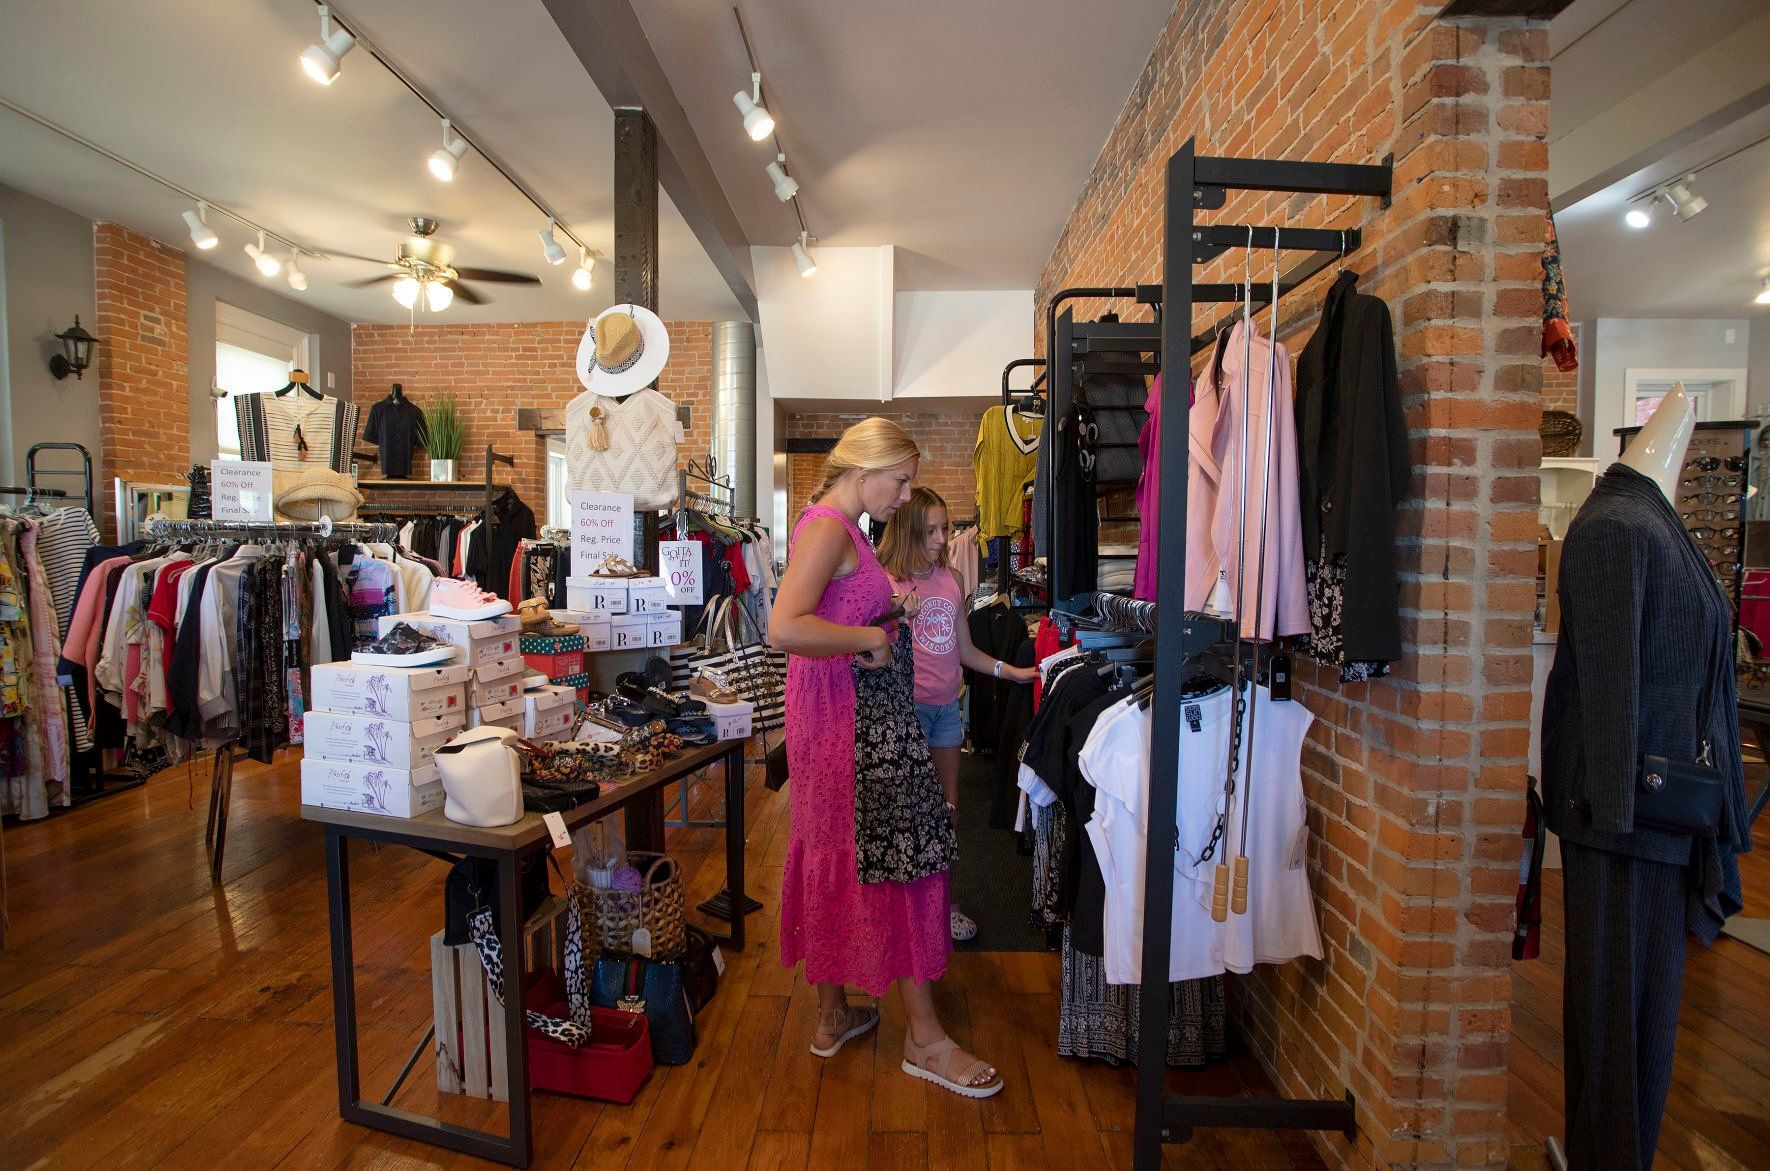 Lauren (left) and Ella Jeager, from Texas, shop at Gotta Have It in Dubuque on Thursday, August 4, 2022.    PHOTO CREDIT: Stephen Gassman